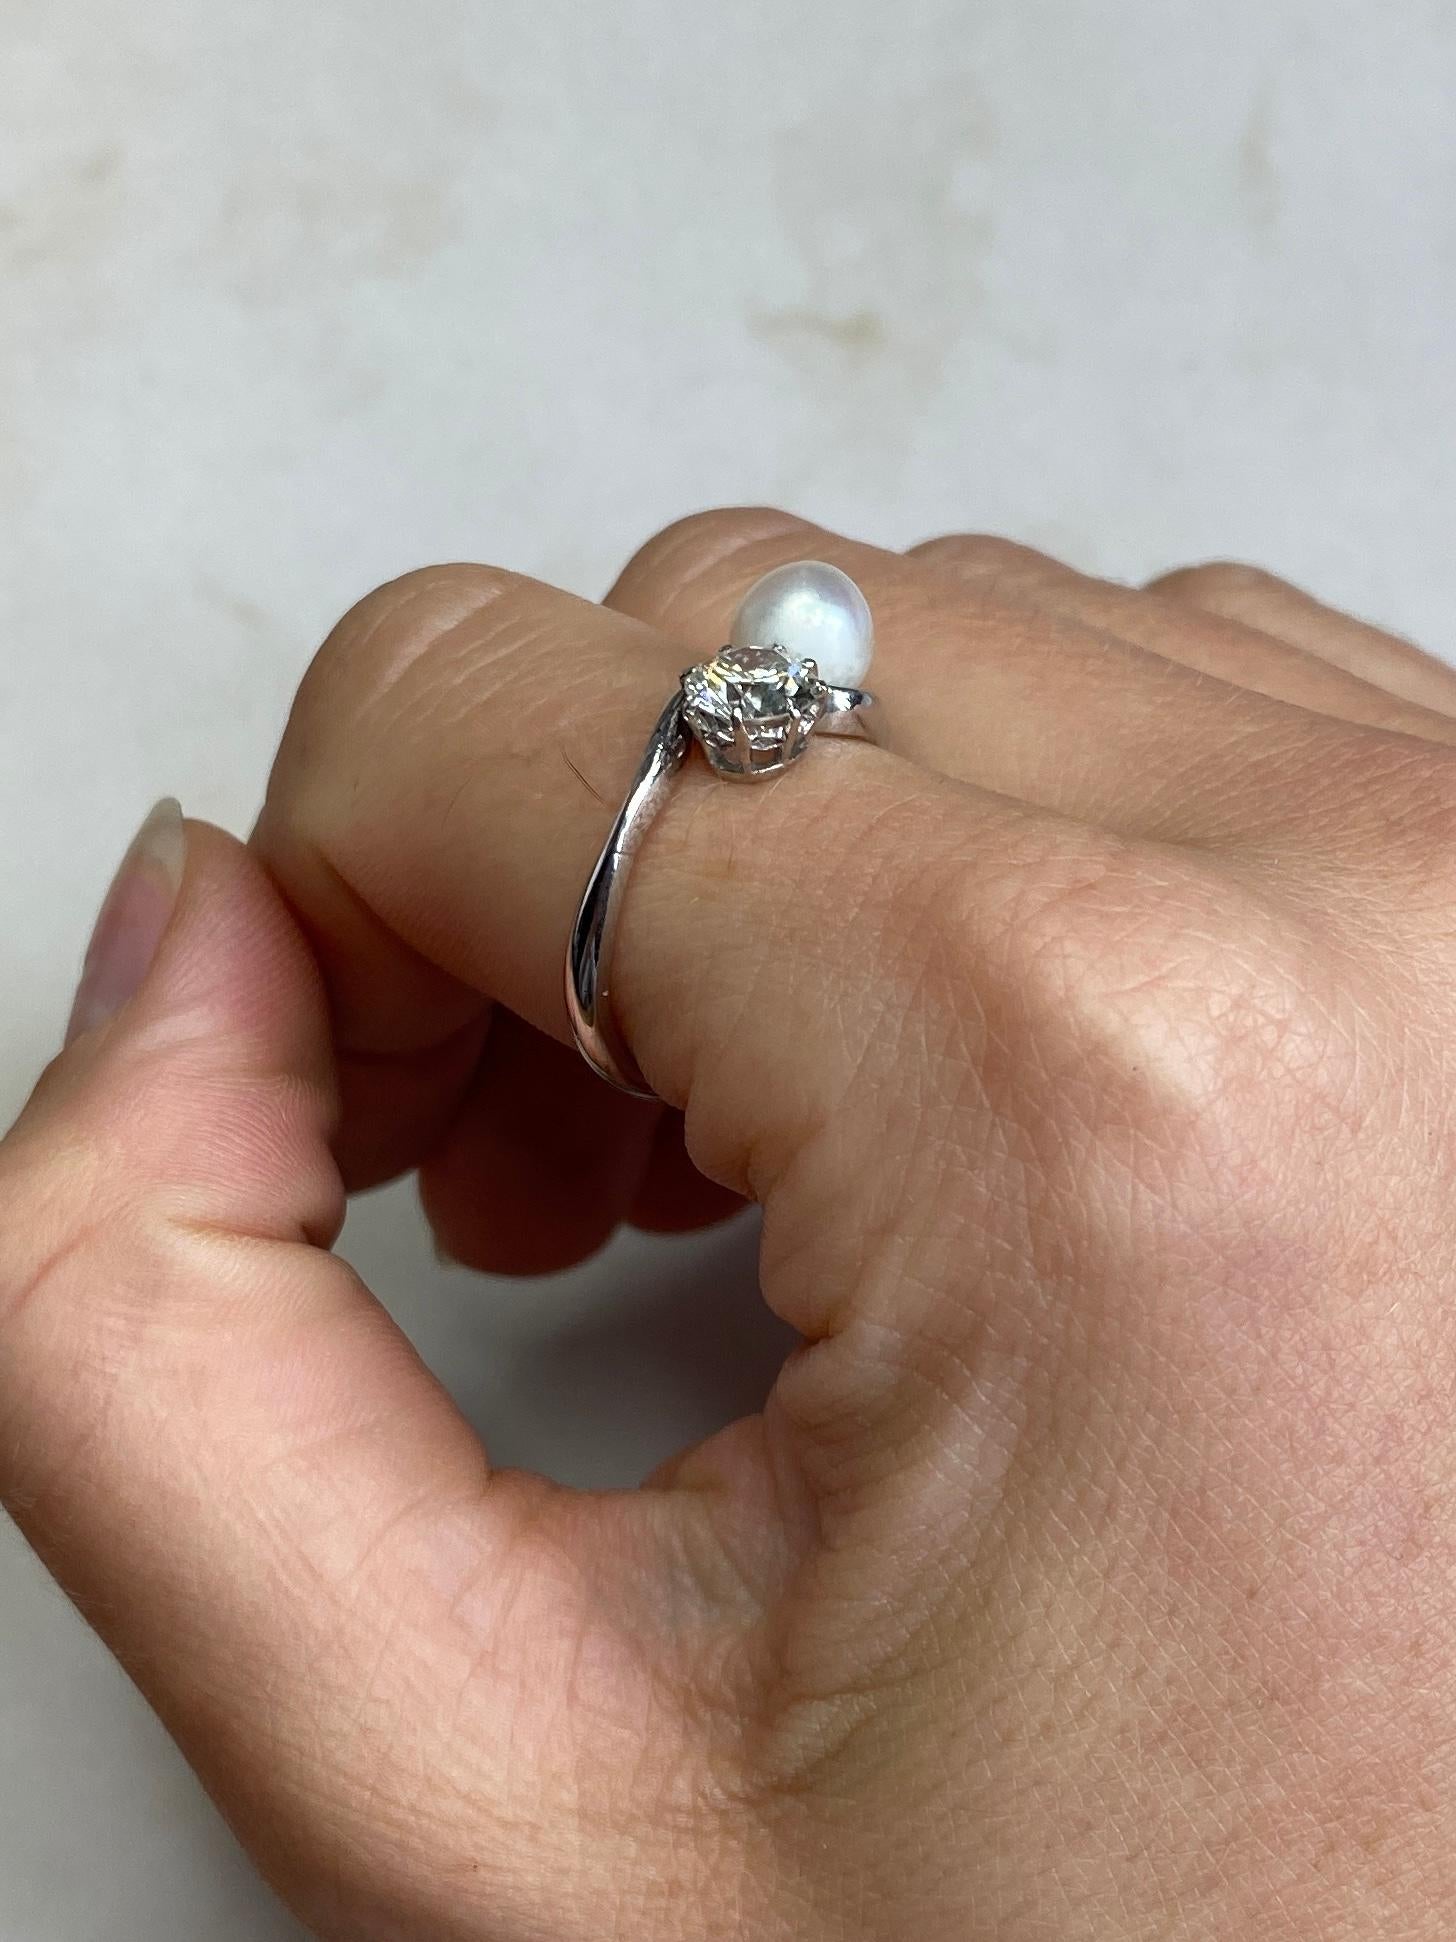 This elegant ring features a diamond which is claw set and a natural pearl. The diamond is 80pts. The pearl and the diamond are set in 18 carat white gold in a crossover design, also called Toi Et Moi / Moi Et Toi.

Ring size : O 1/2 or 7 1/2
Height